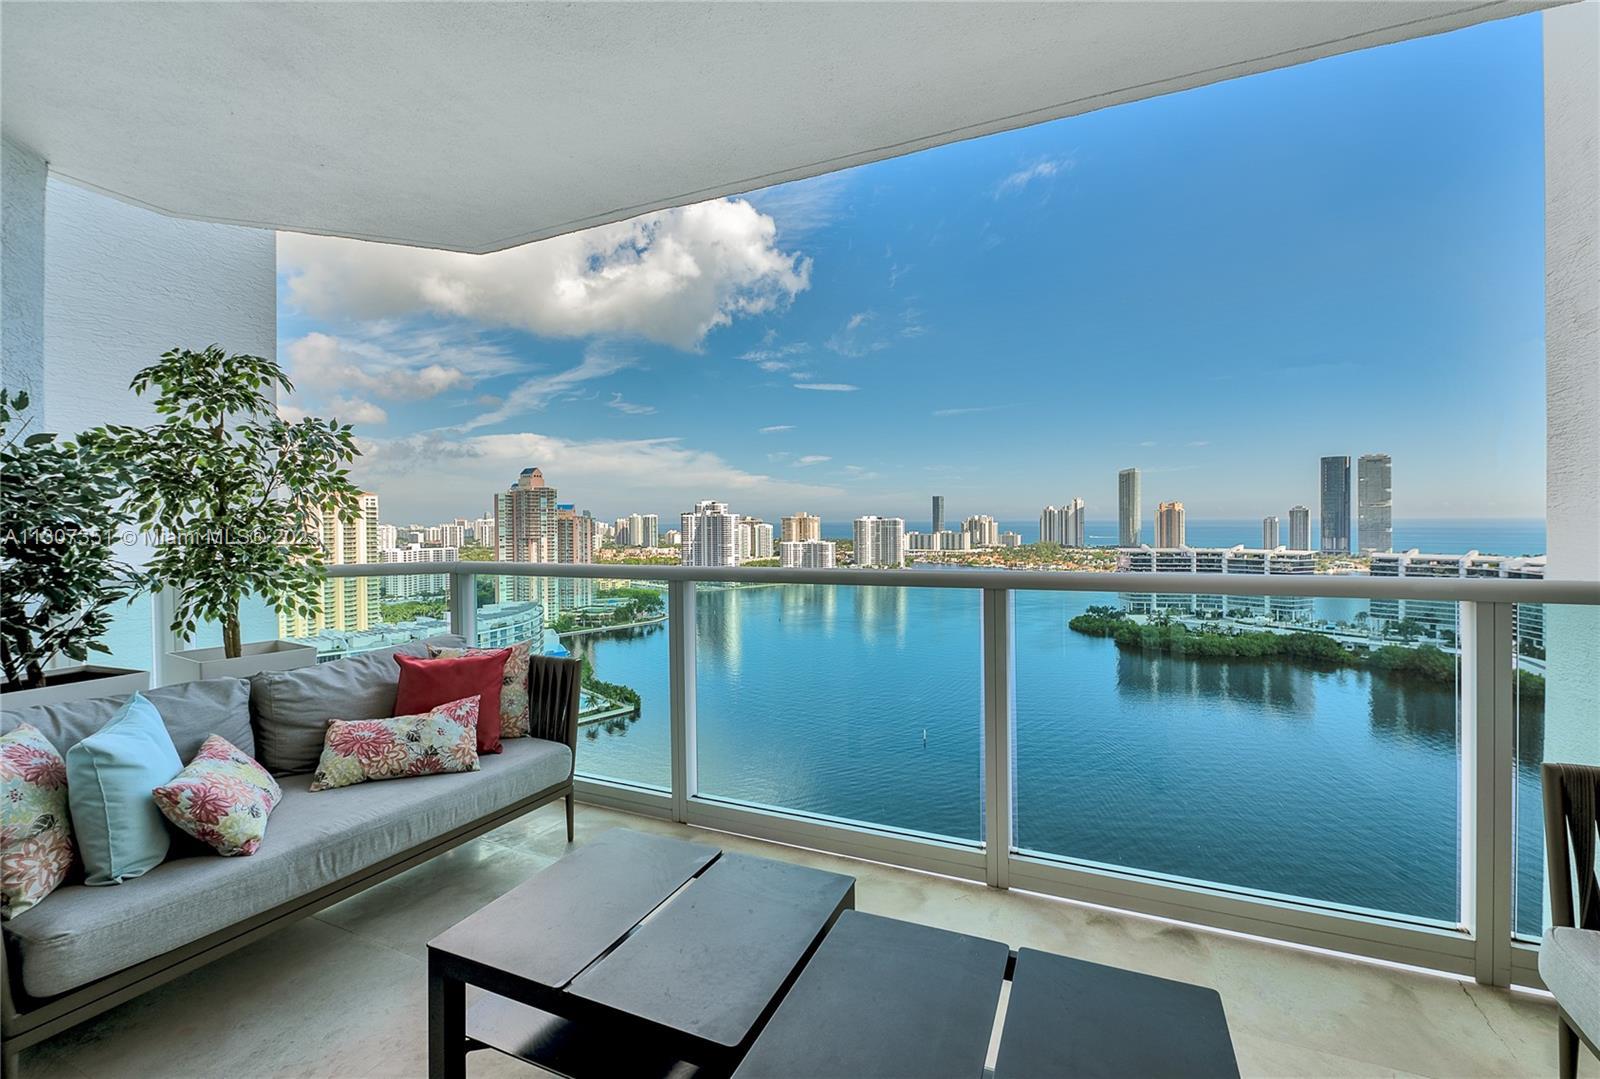 Location Location!  Stunning views in luxurious The Peninsula II Condo,  This lower PH is one of the